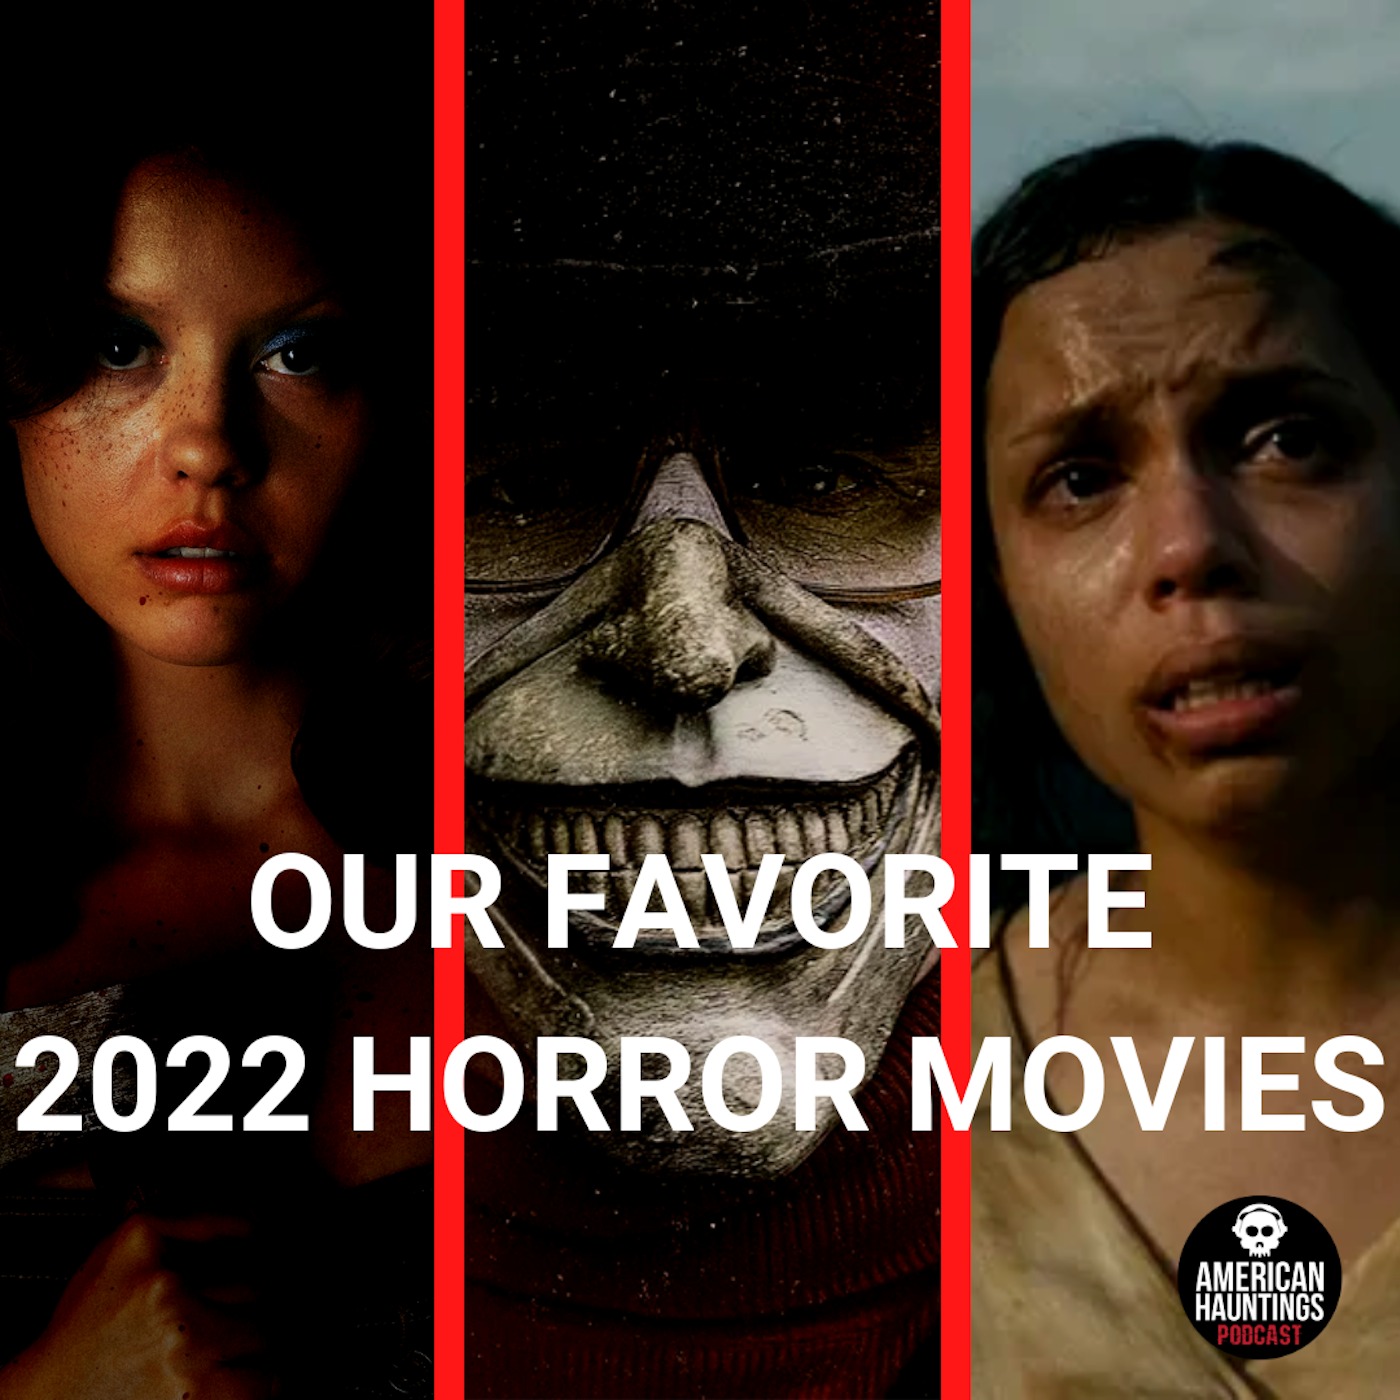 Our Favorite 2022 Horror Movies